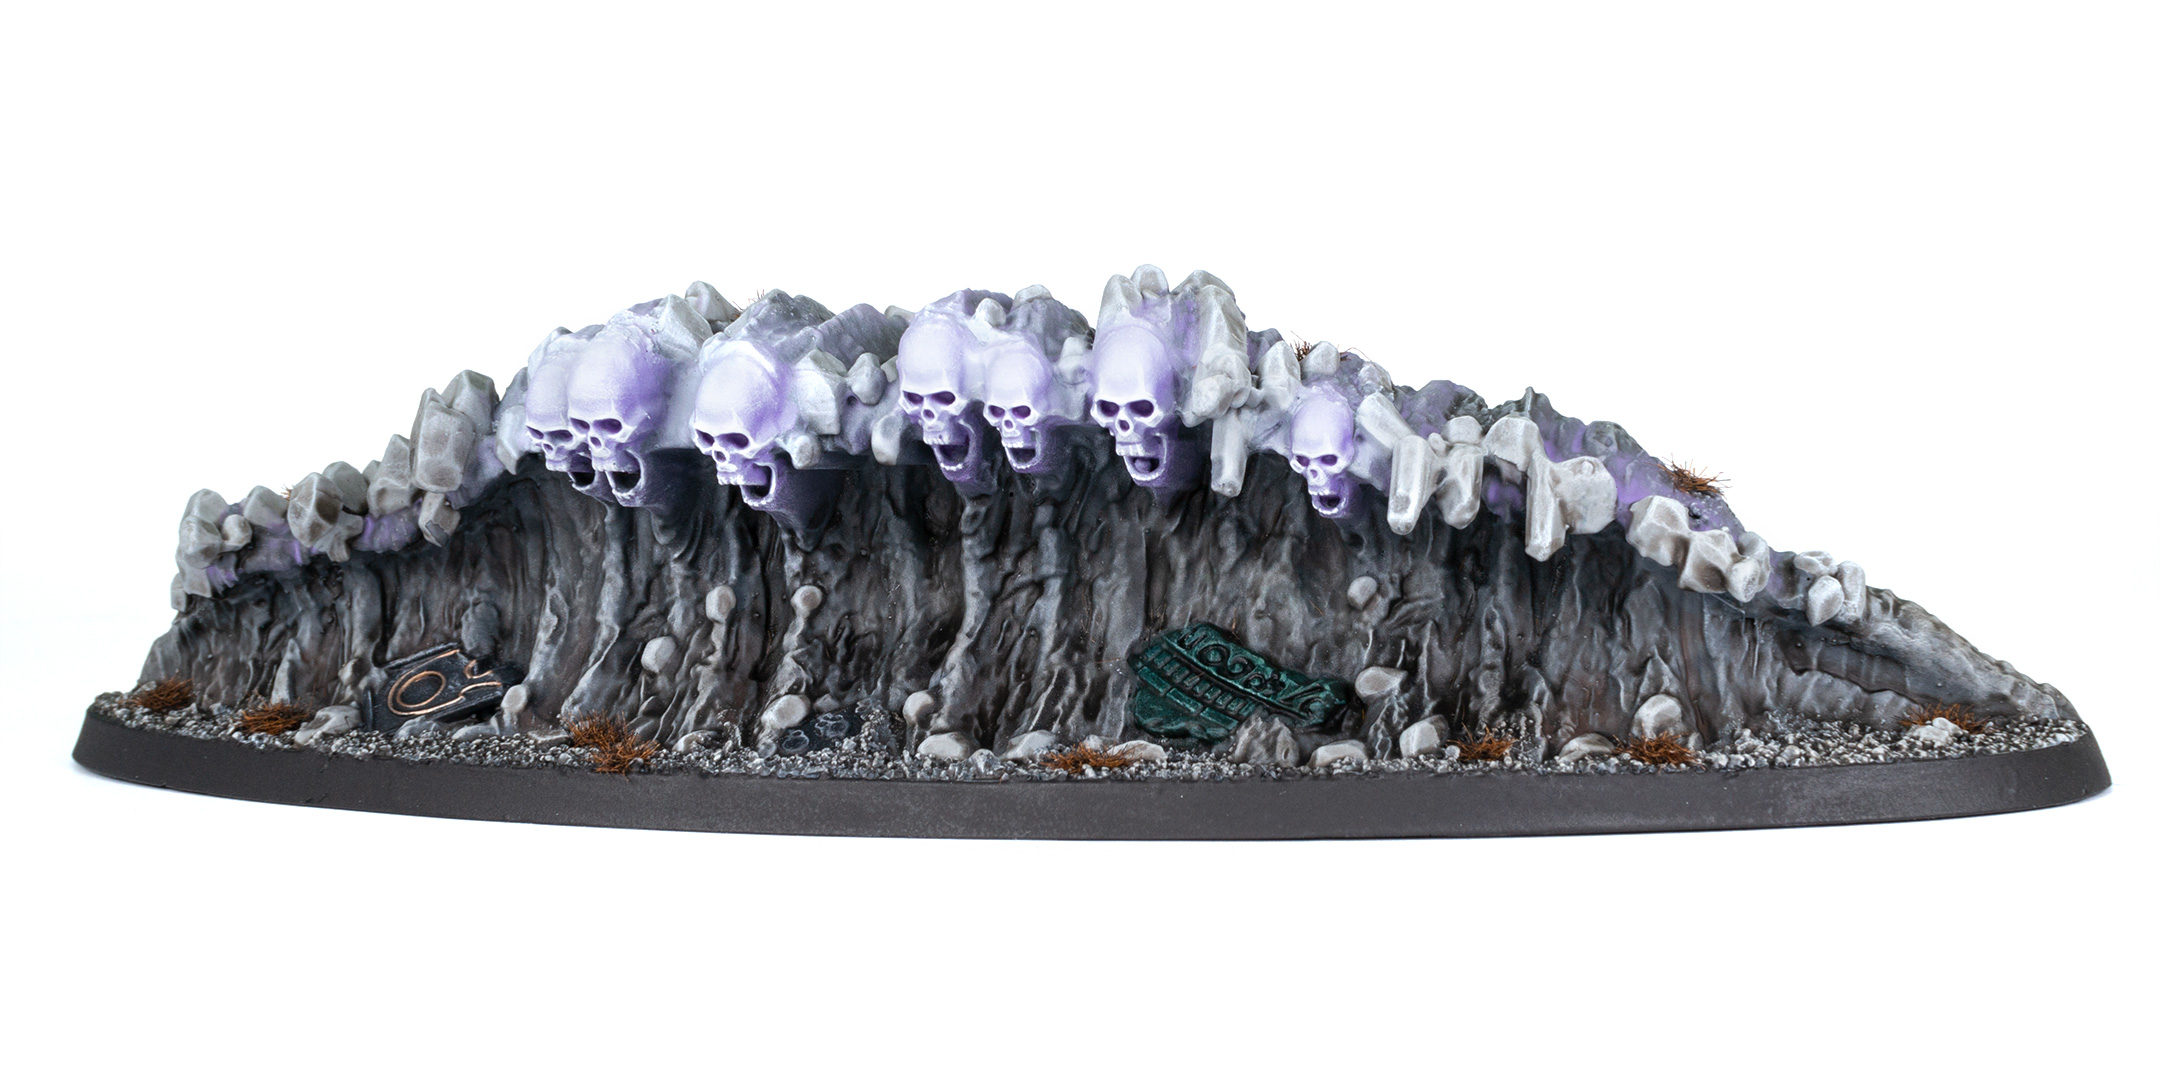 Suffocating Gravetide painted grey and purple